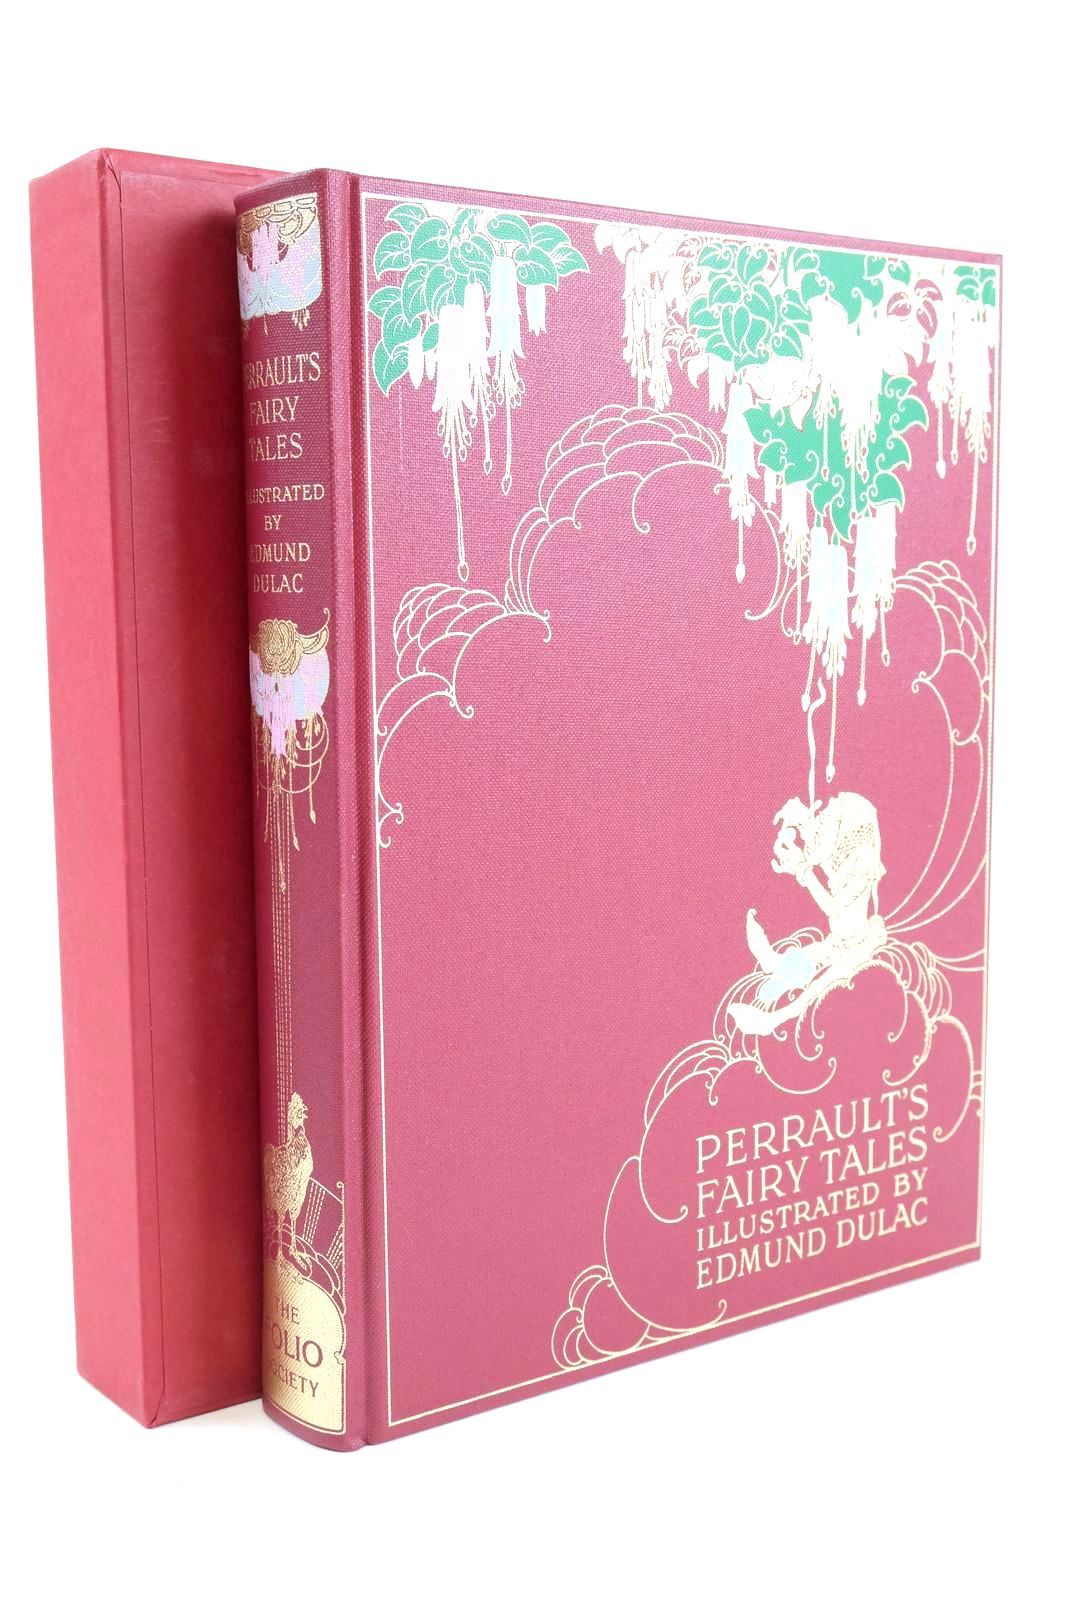 Photo of THE FAIRY TALES OF CHARLES PERRAULT written by Perrault, Charles illustrated by Dulac, Edmund published by Folio Society (STOCK CODE: 1324728)  for sale by Stella & Rose's Books